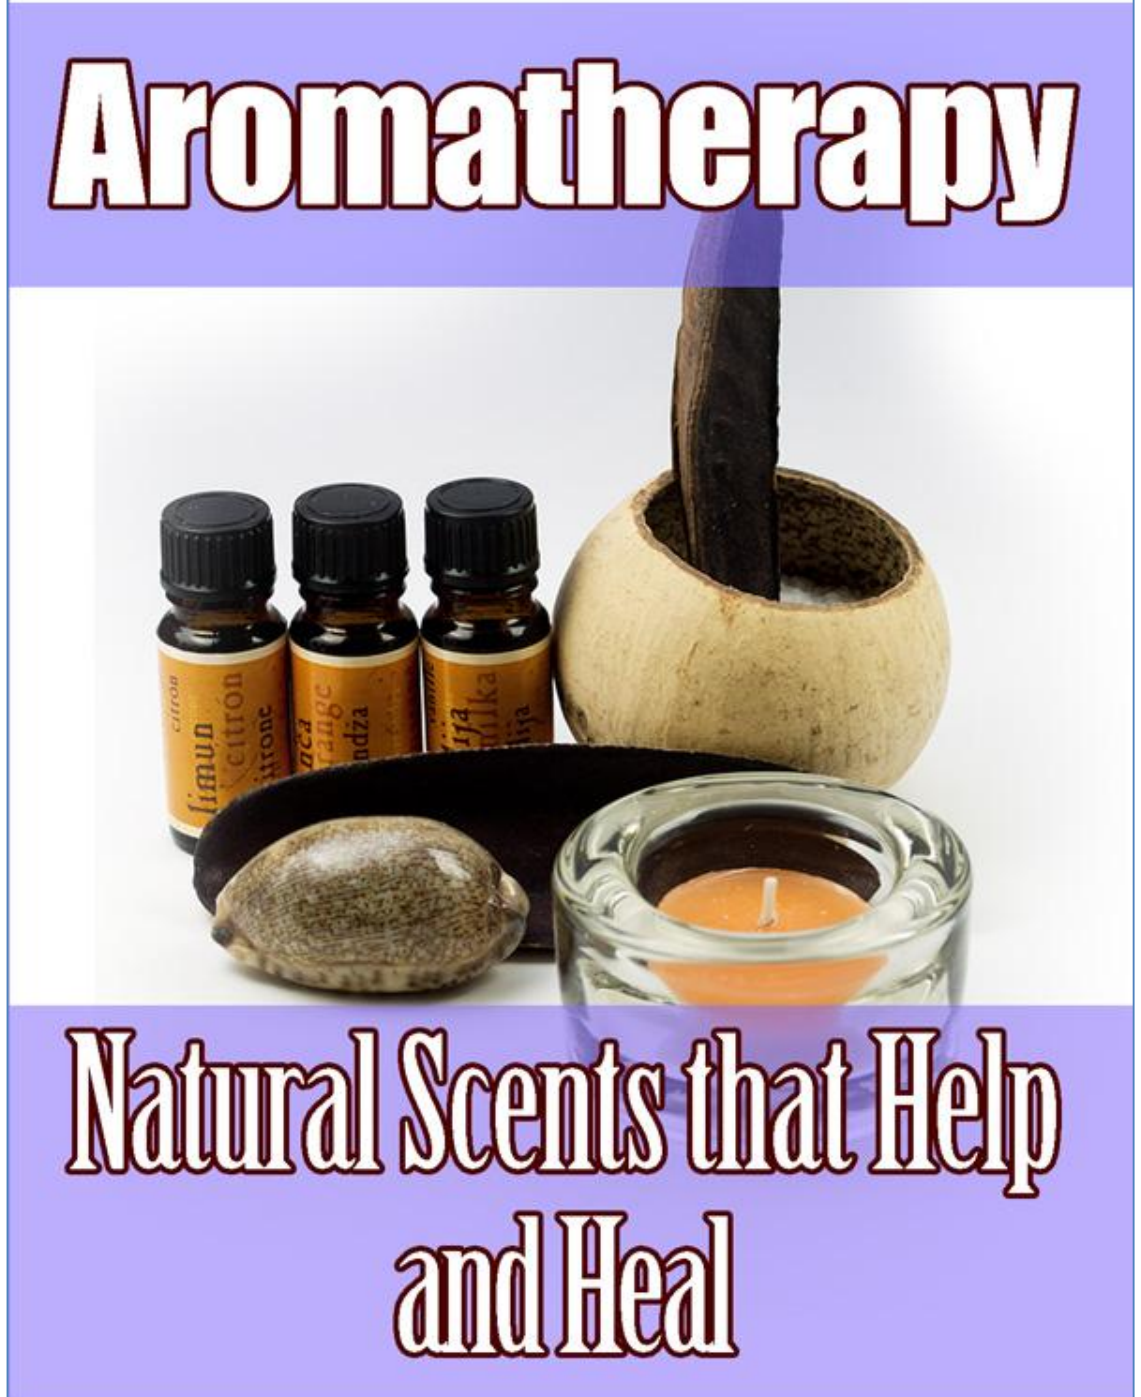 Aromatherapy Natural Scents that Help and Heal